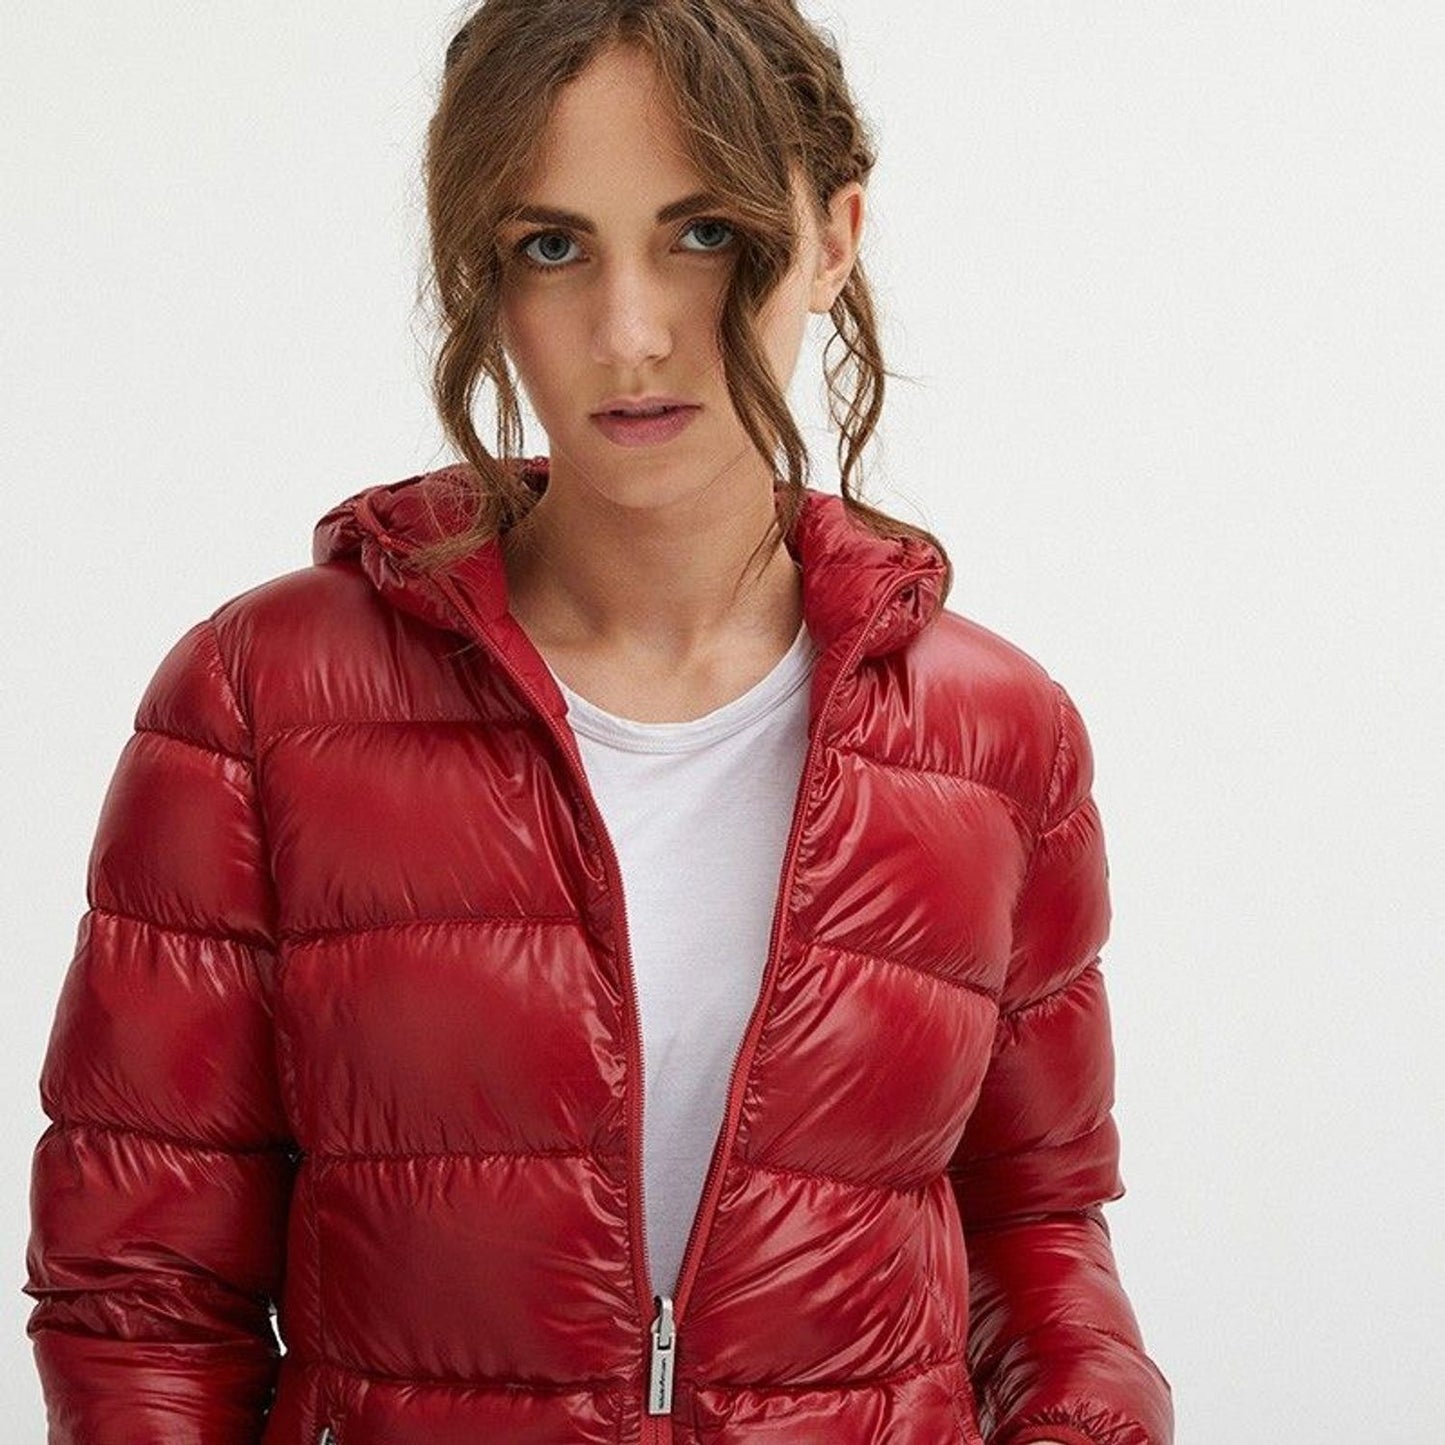 Centogrammi Reversible Goose Down Long Jacket in Pink red-nylon-jackets-coat-3 product-8316-440938162-10-3a9c3024-021.jpg